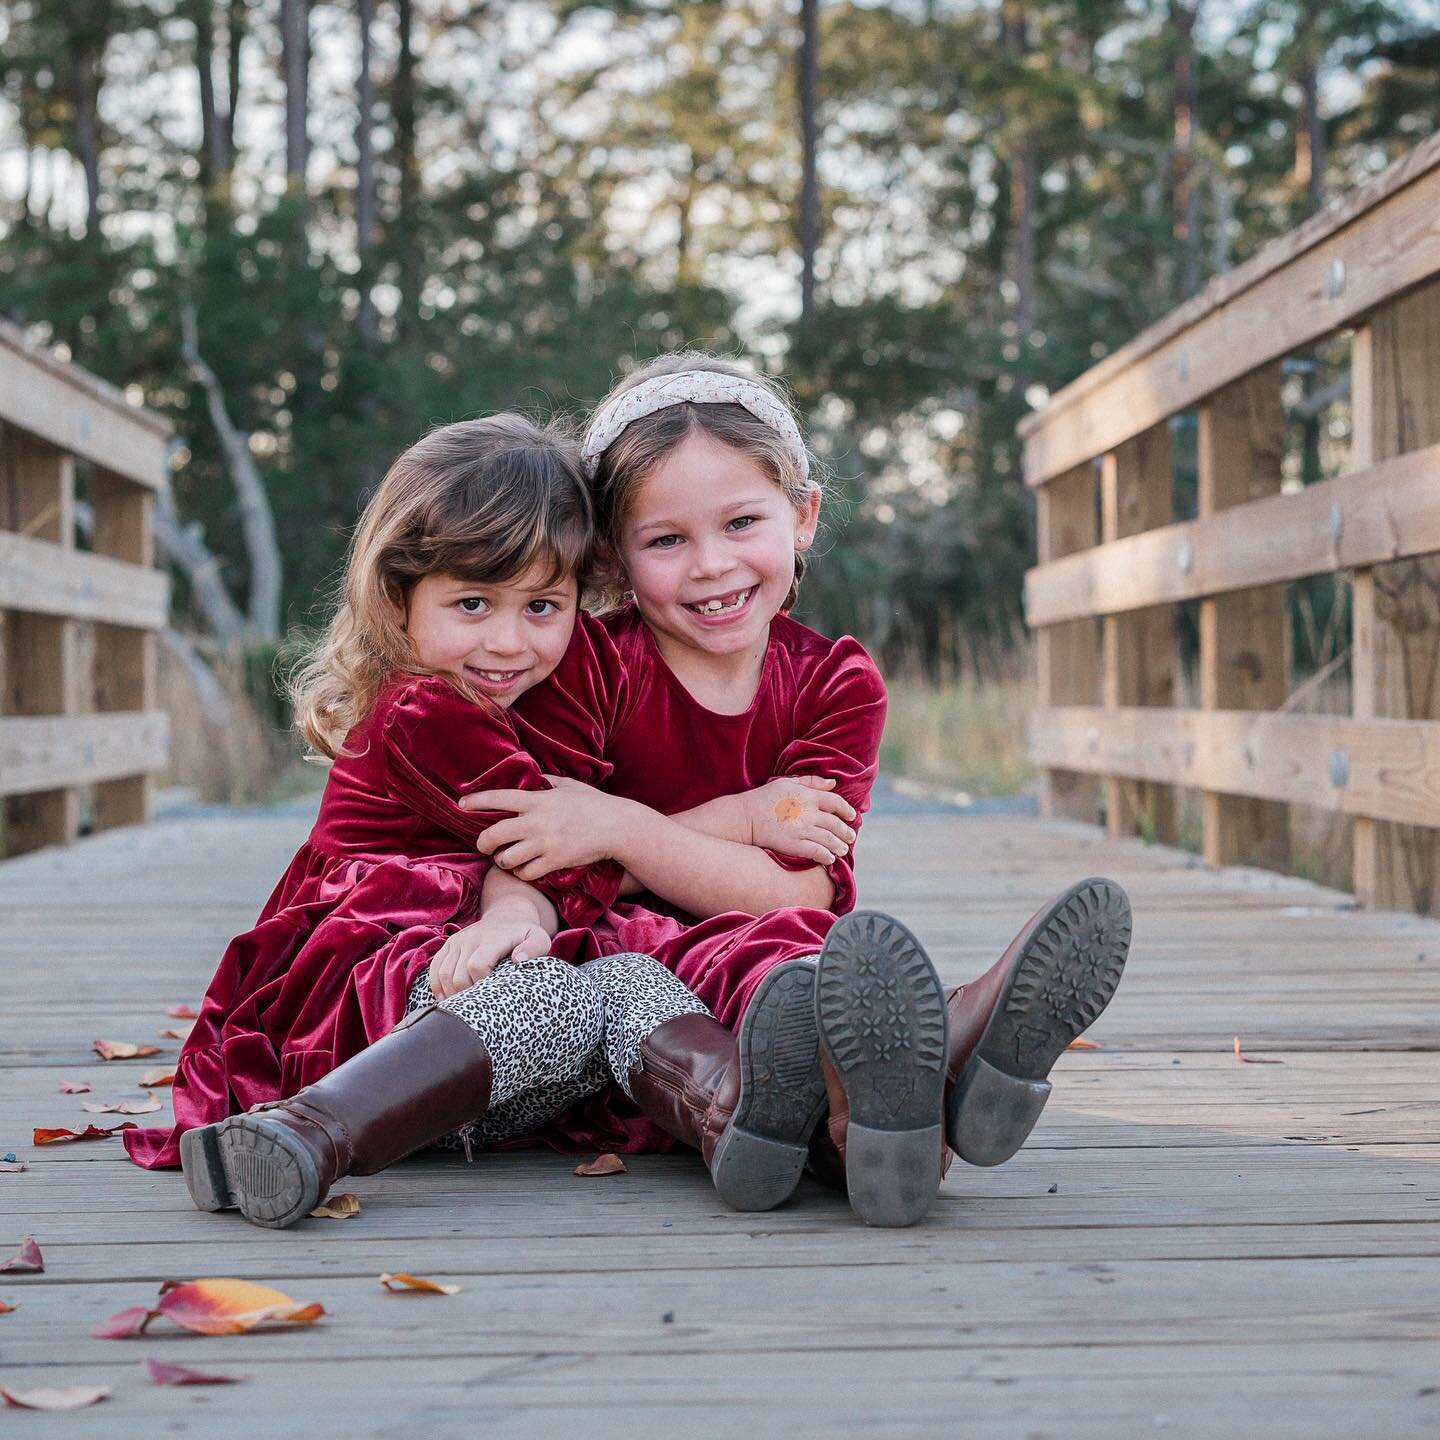 So much fun capturing the excitement and anticipation in the eyes of these sweet girls. Their playful laughter and tender moments with their mom spread love and holiday cheer all around. 

#ChristmasCountdown 
#danielislandfamilyphotographer 
#charle